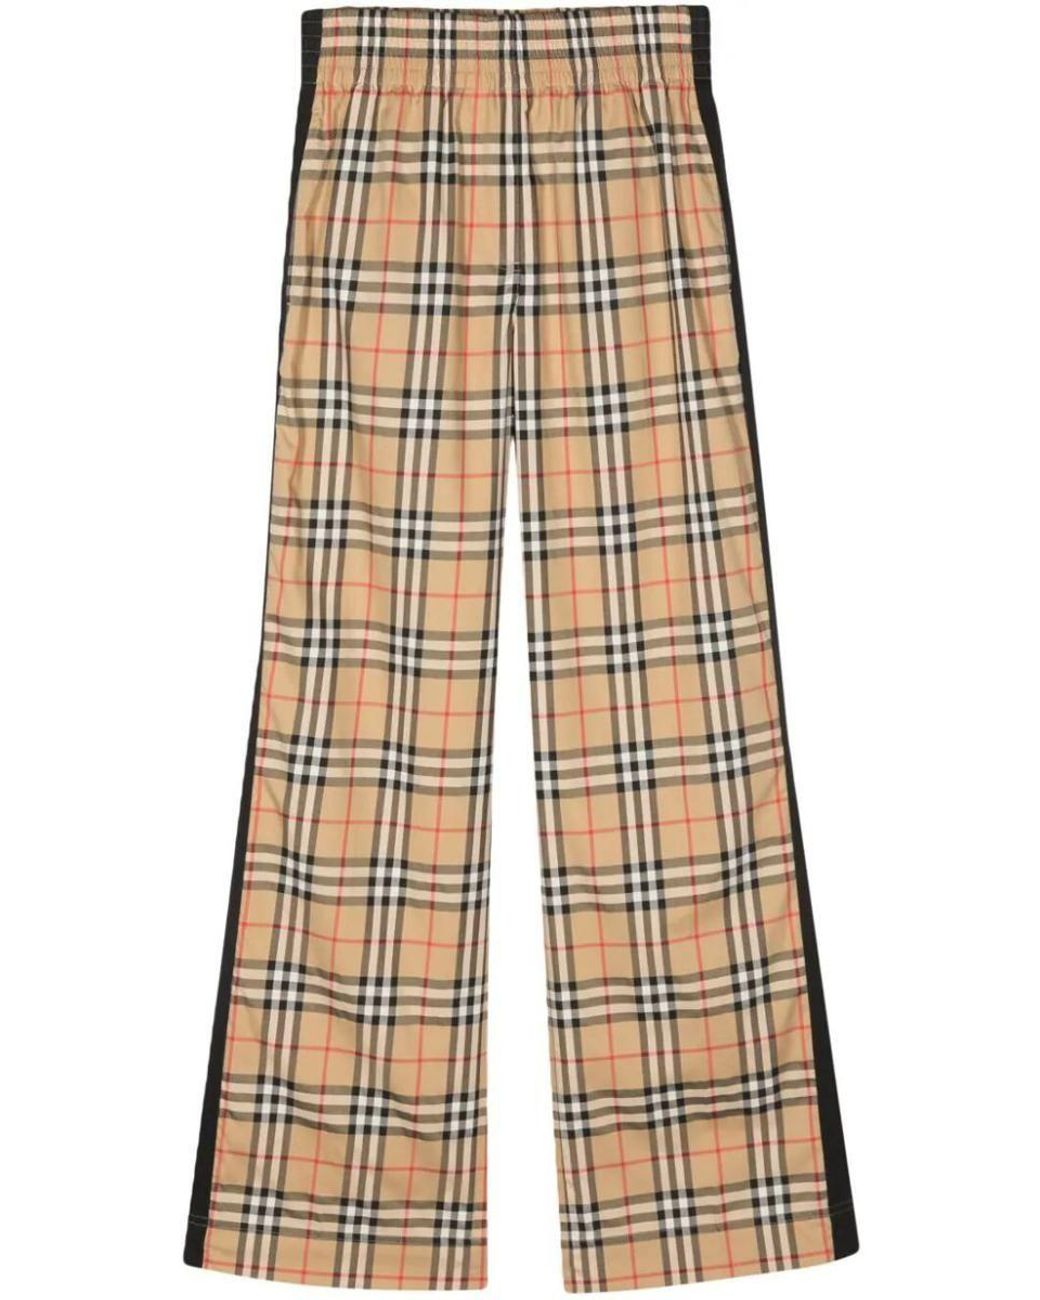 Burberry Vintage Check Straight-leg Trousers in Natural